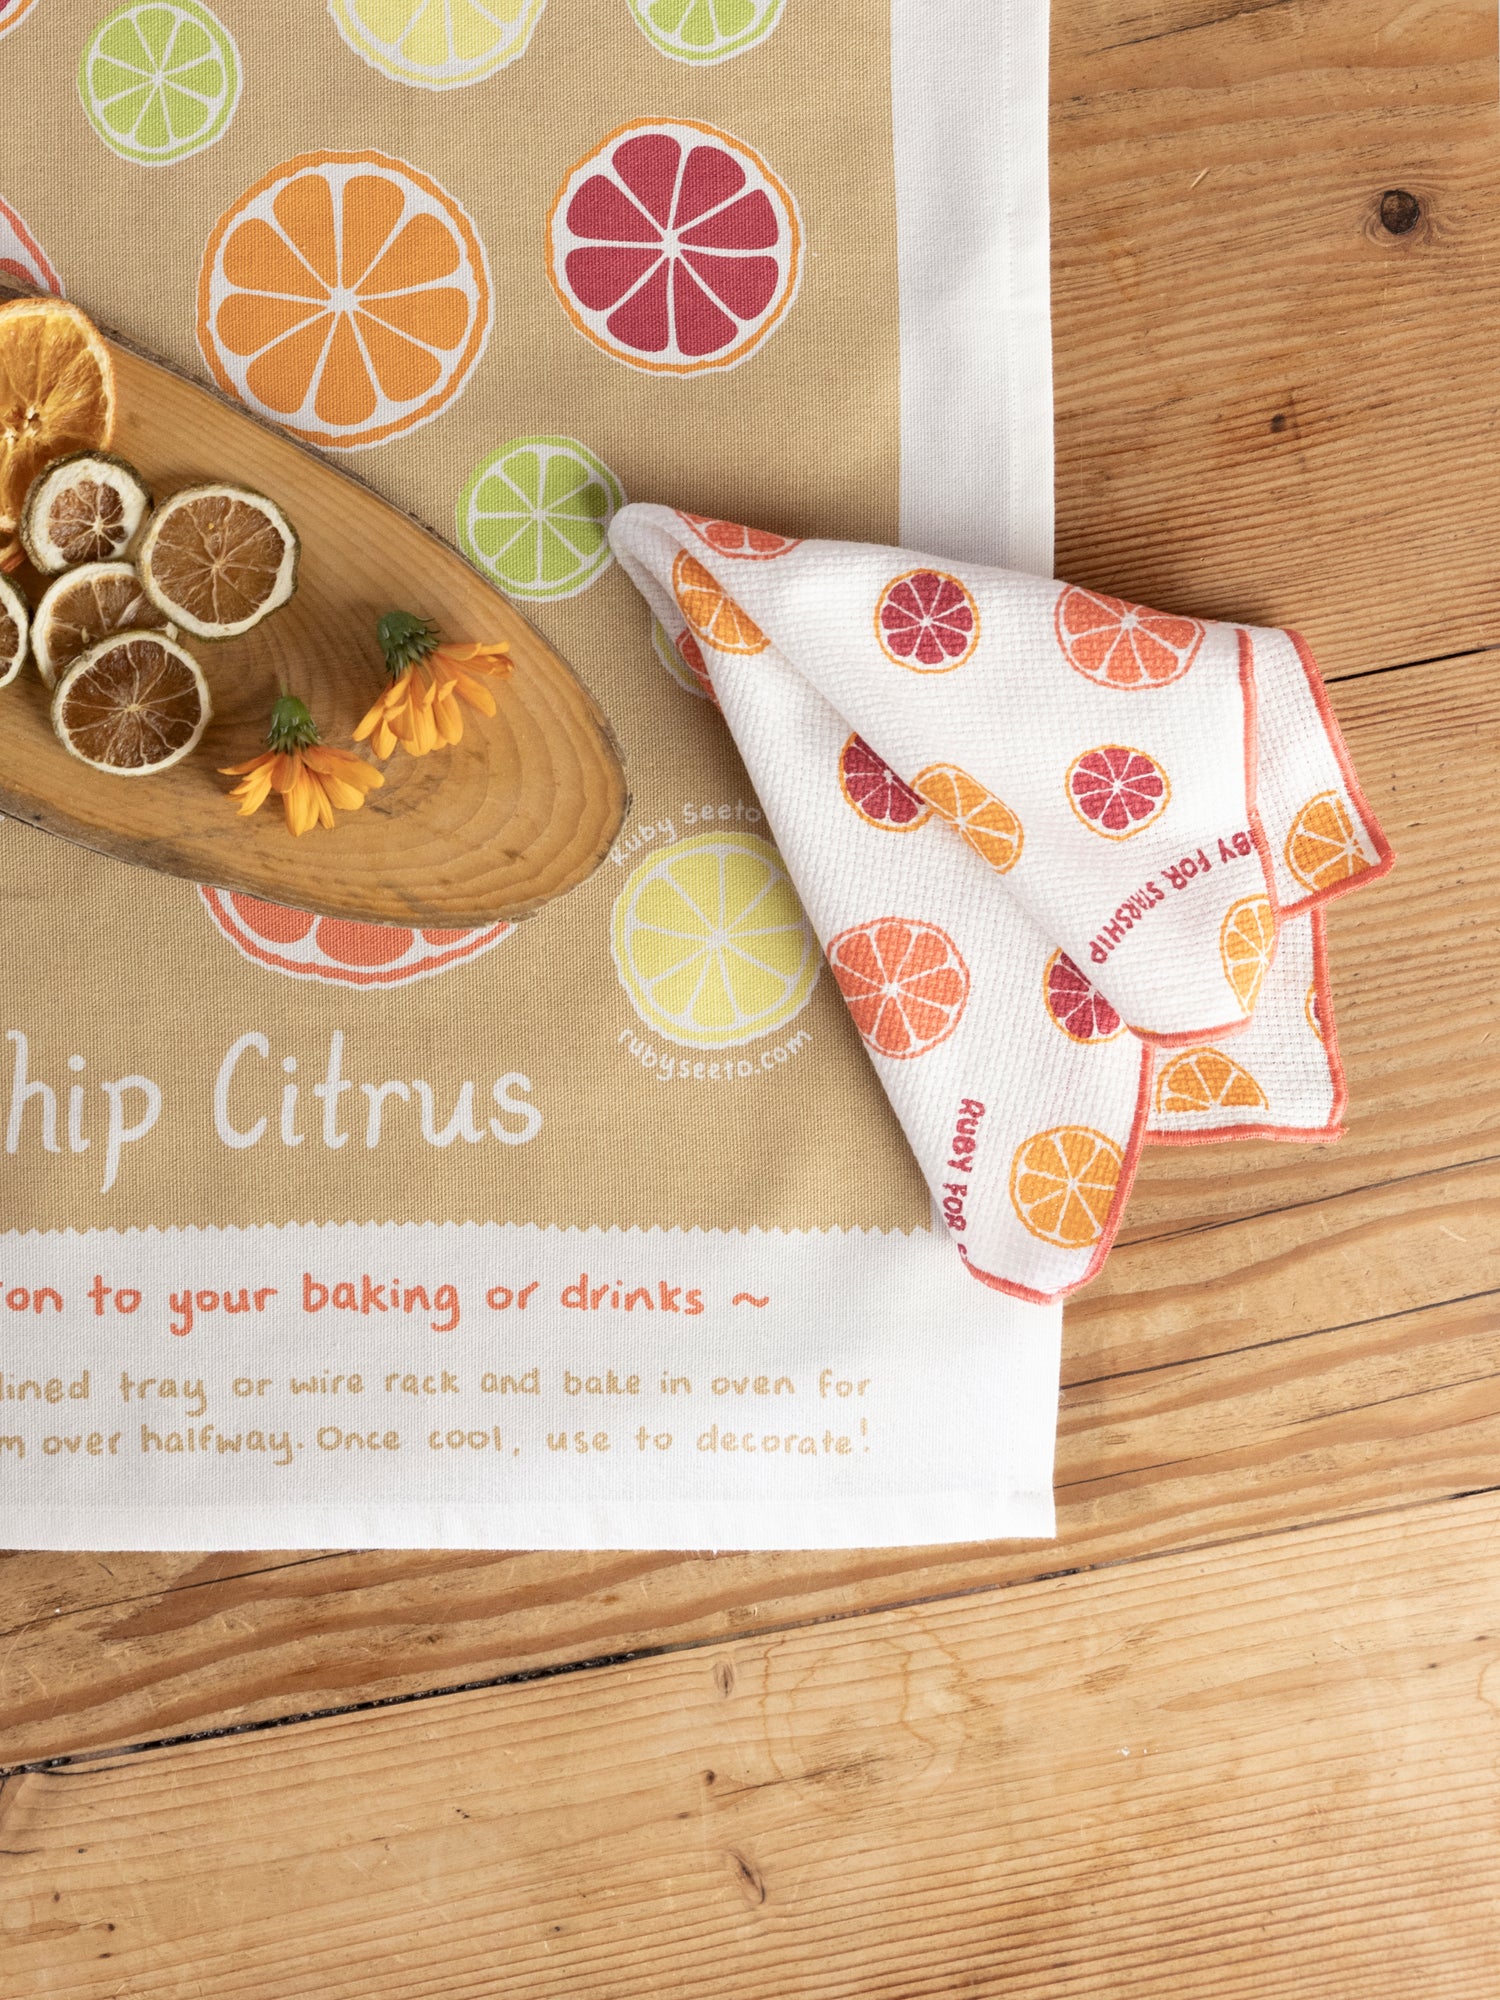 https://www.wallacecotton.com/content/products/starship-citrus-wash-cloth-set-of-2-multi-2-9133.jpg?width=1500